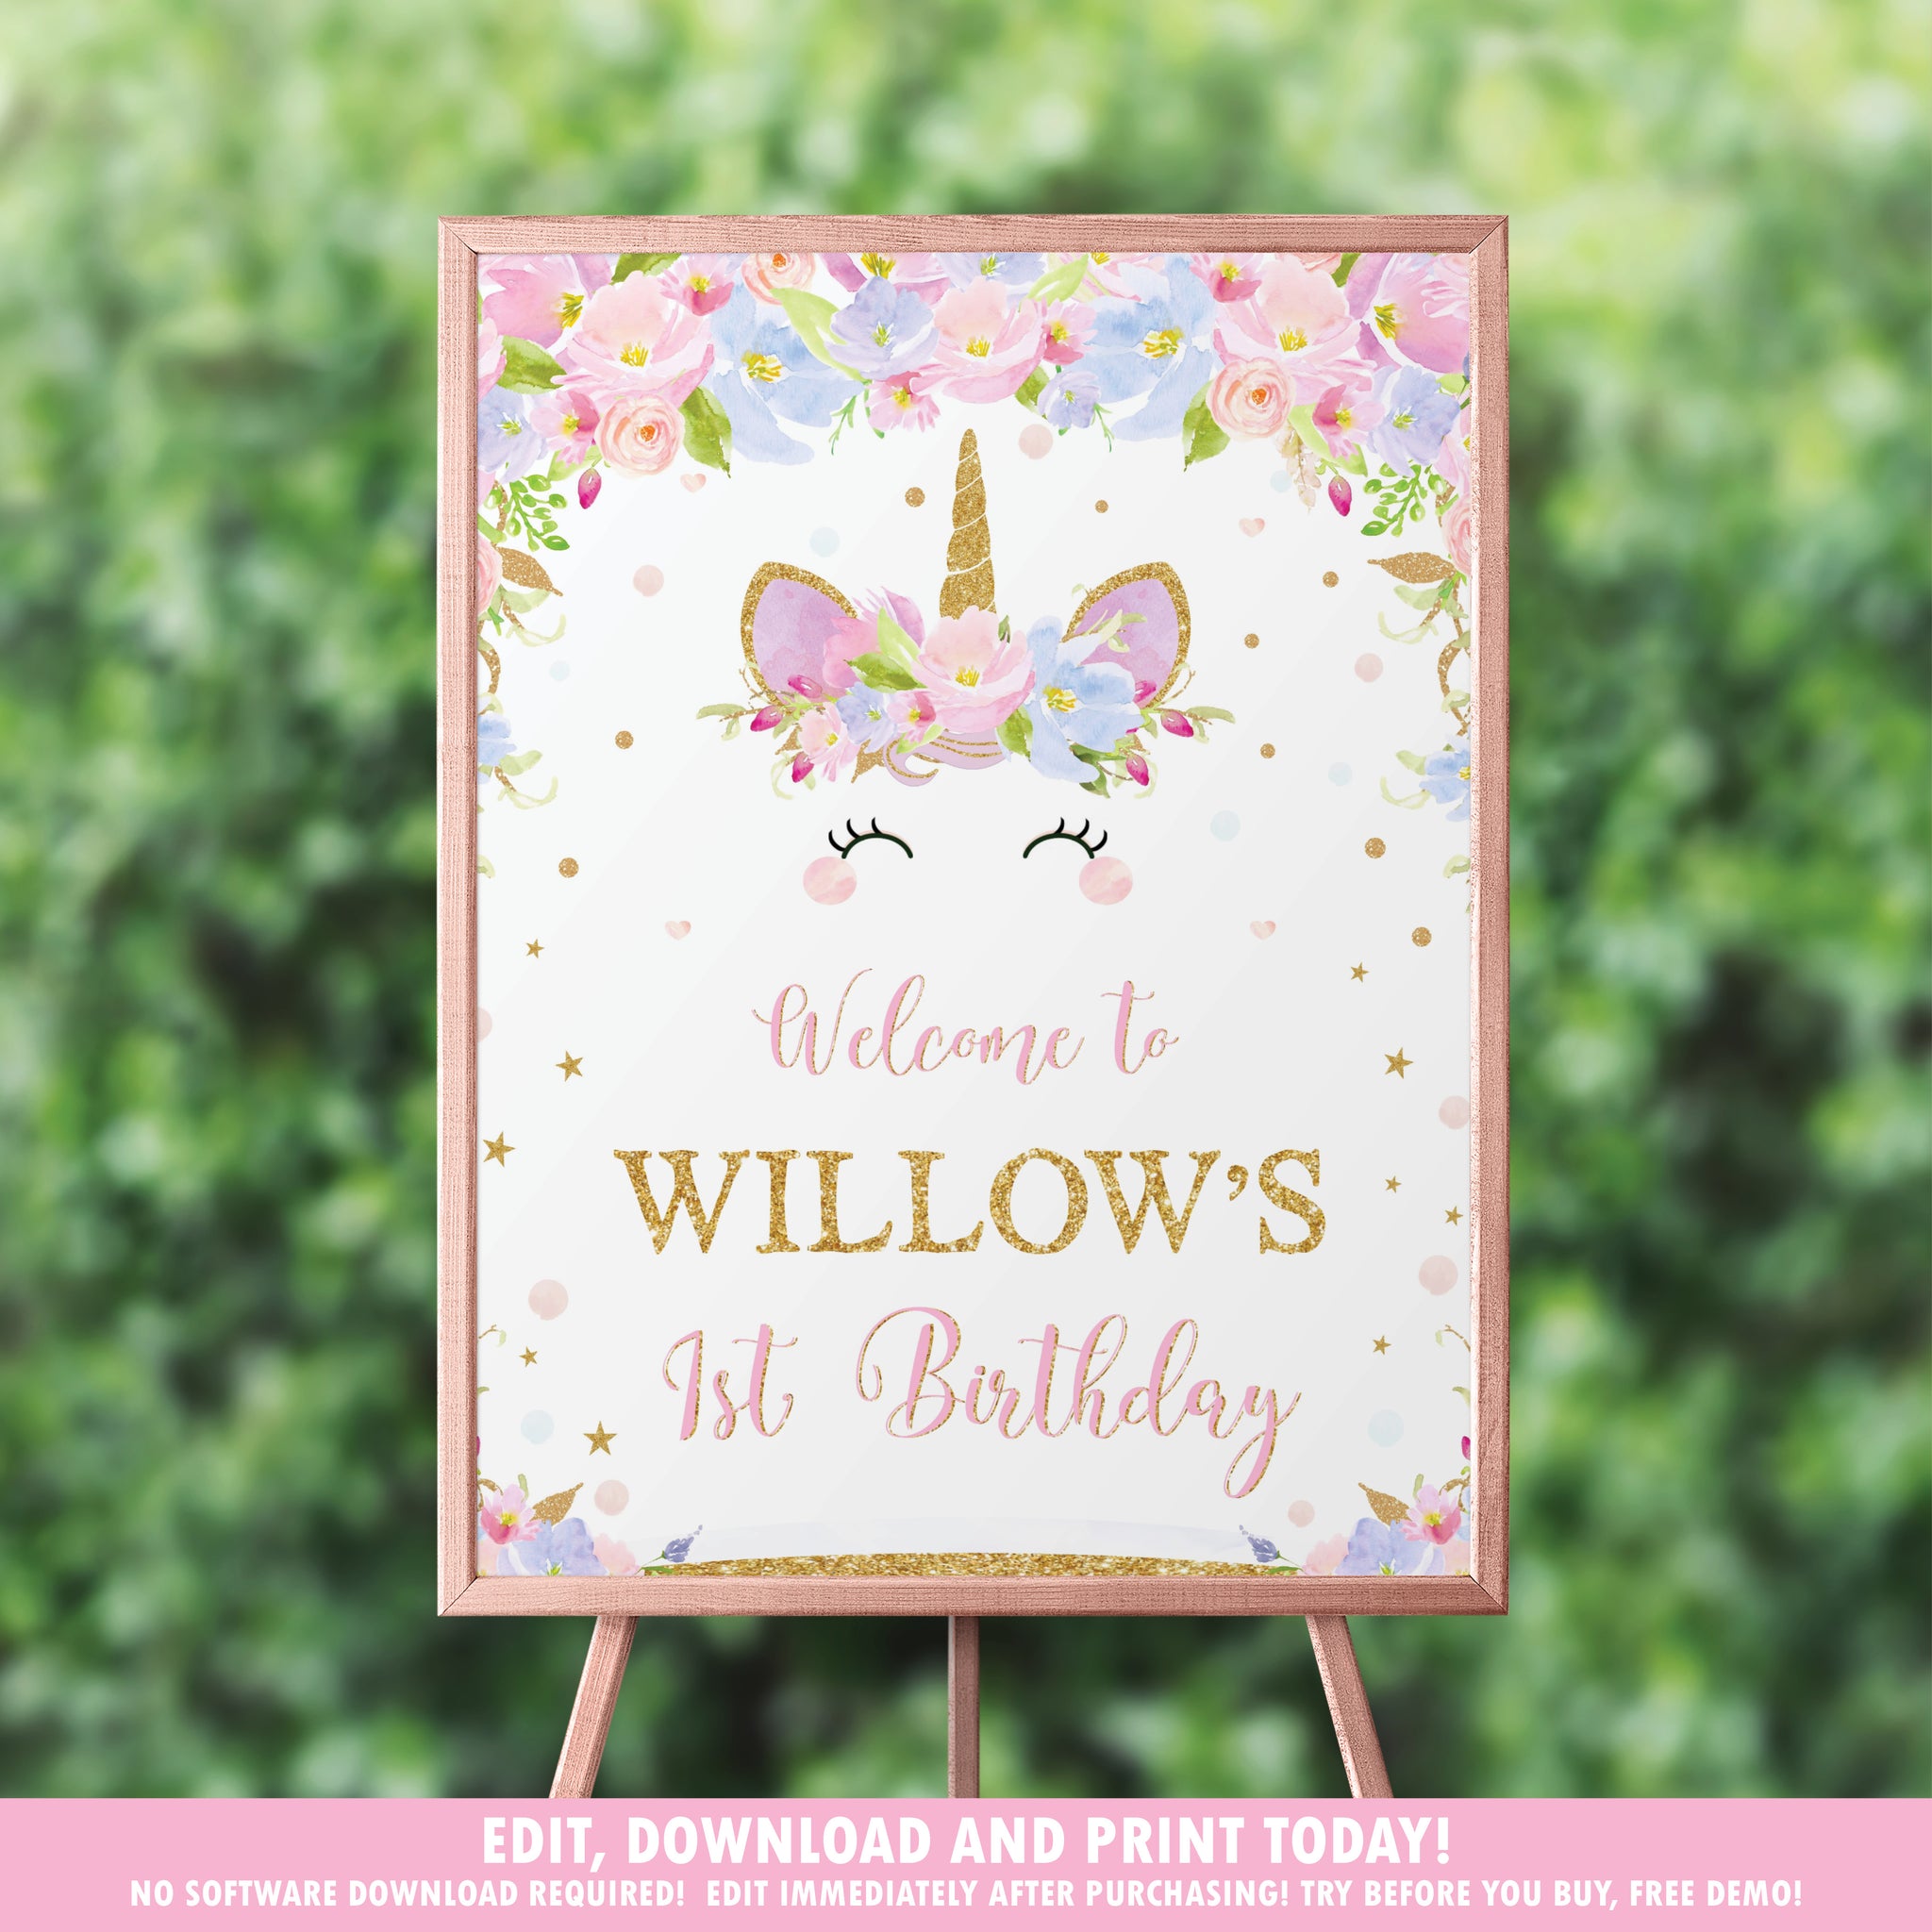 unicorn birthday party baby shower welcome sign poster editable te the happy cat studio